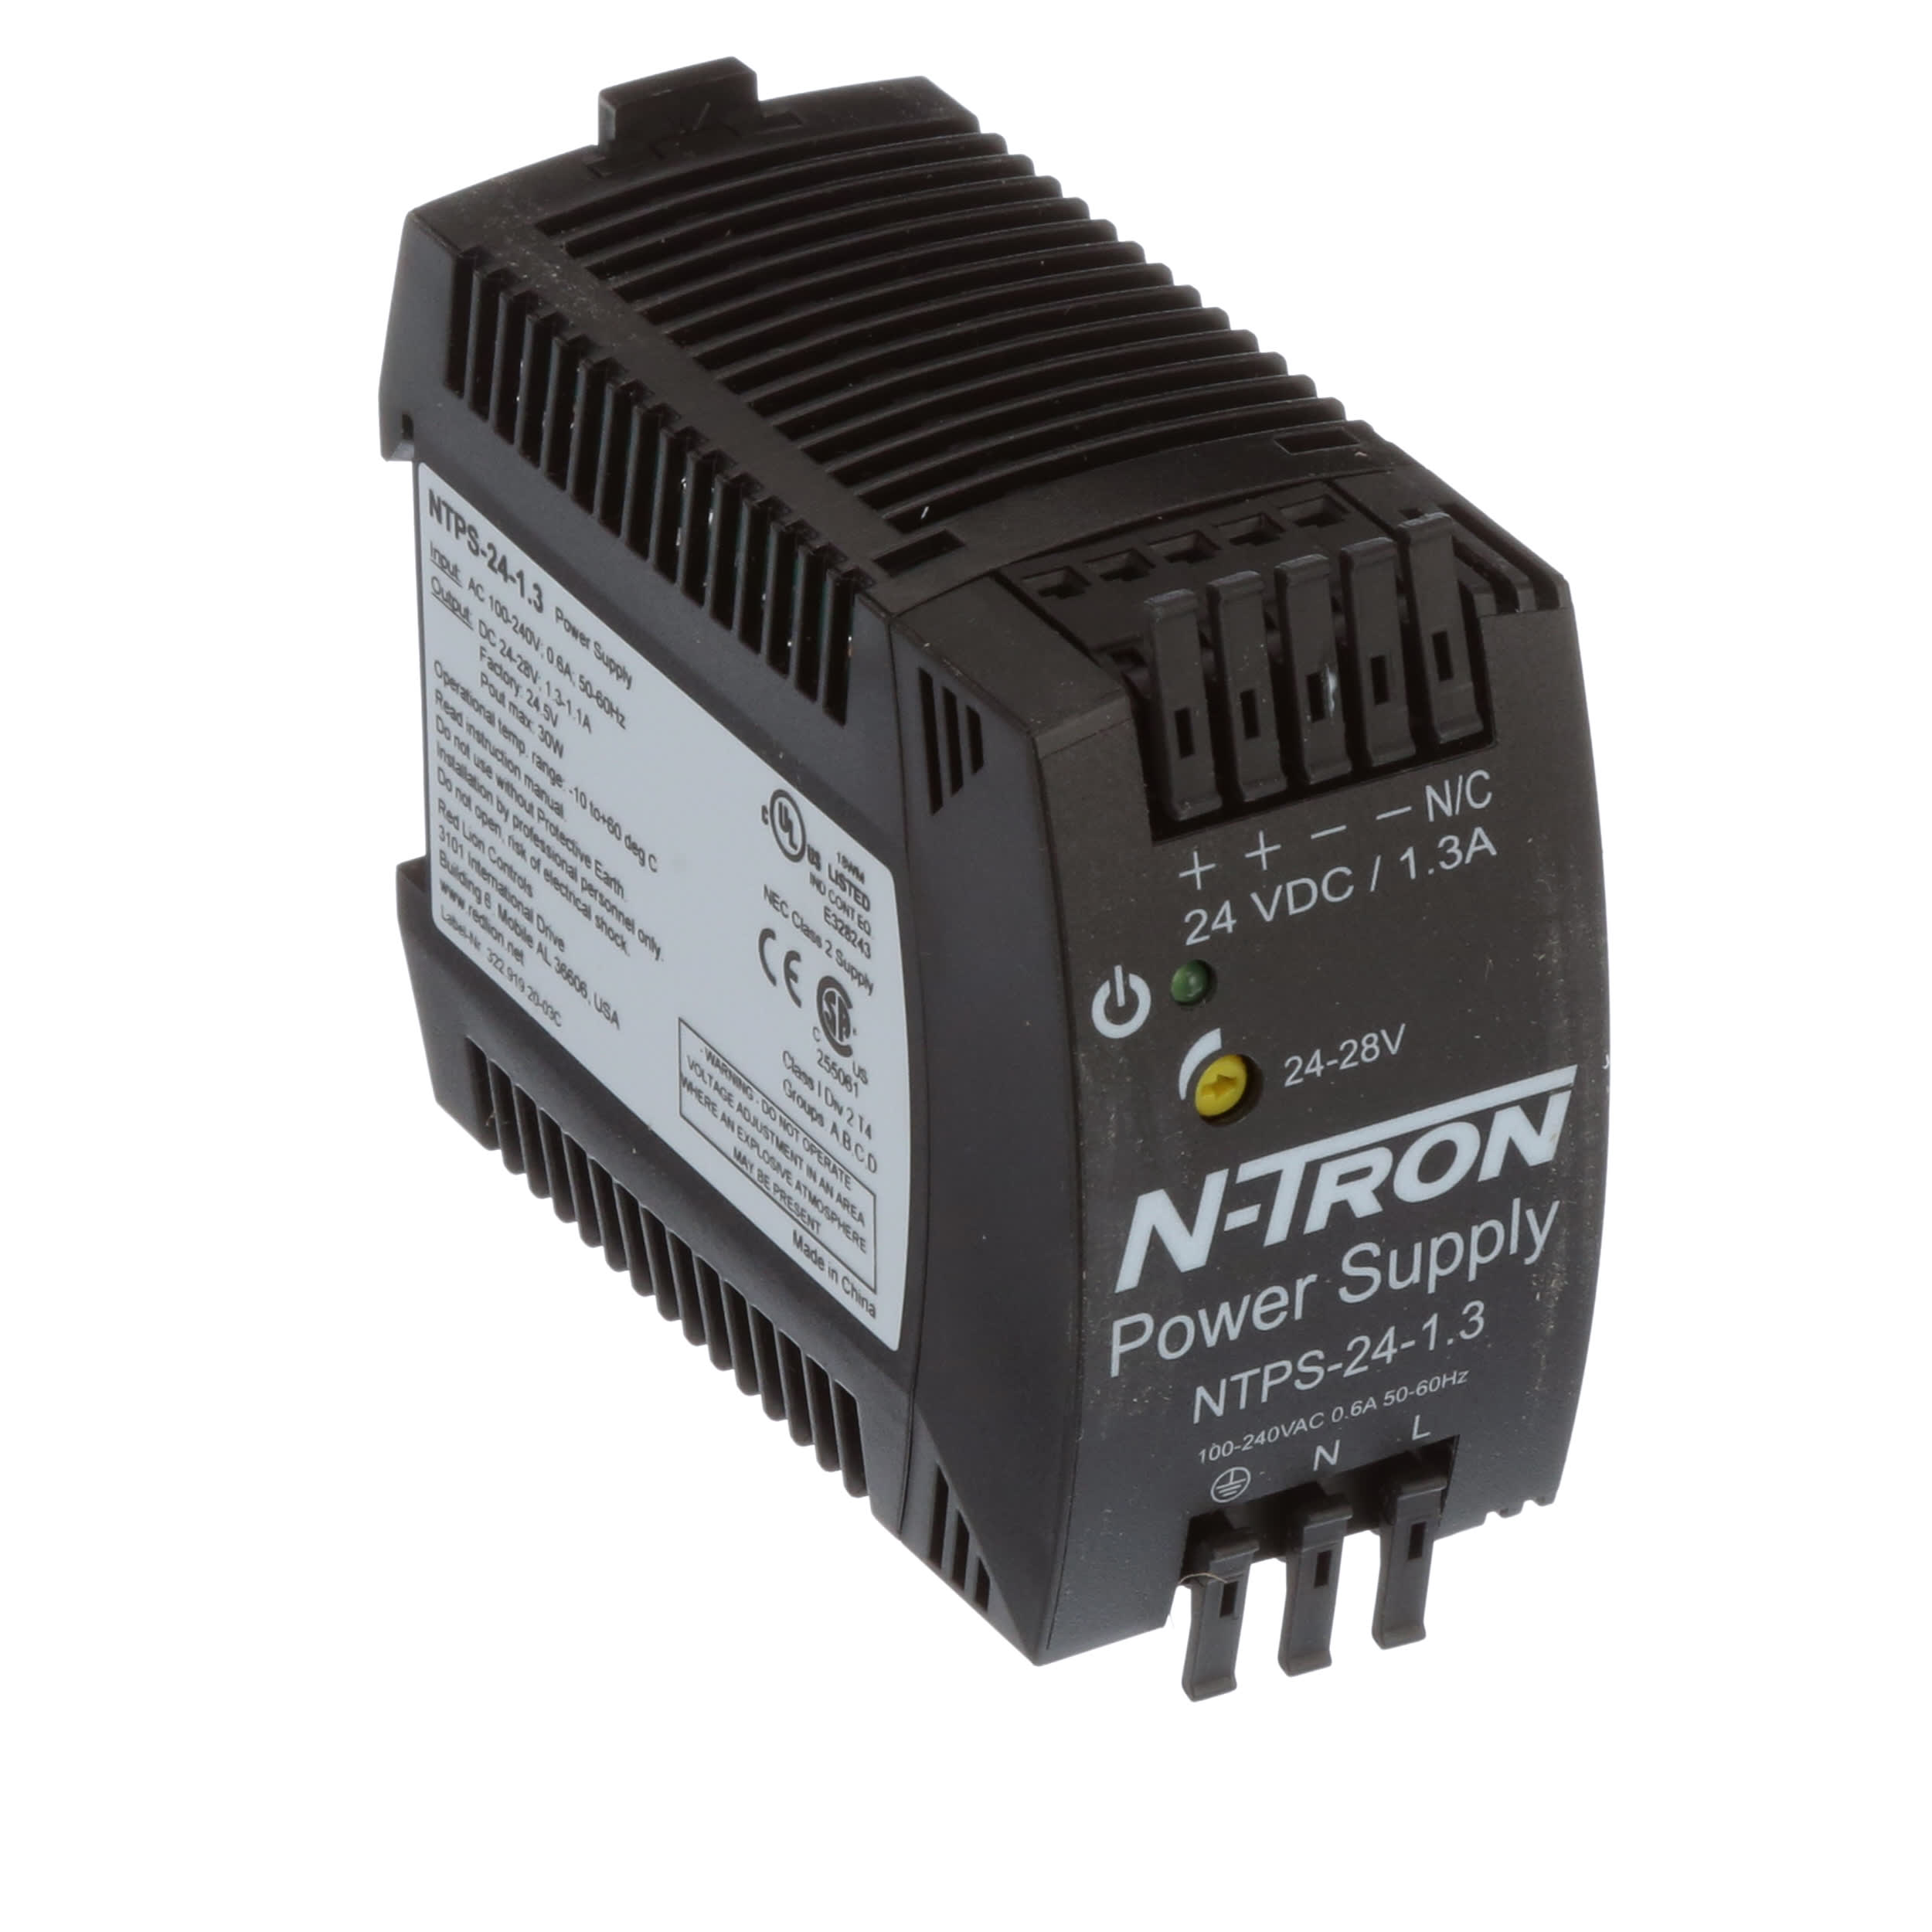 Red Lion Controls Ntps 24 1 3 Power Supply 1 3 Amp 24 Vdc Din Rail Allied Electronics Automation